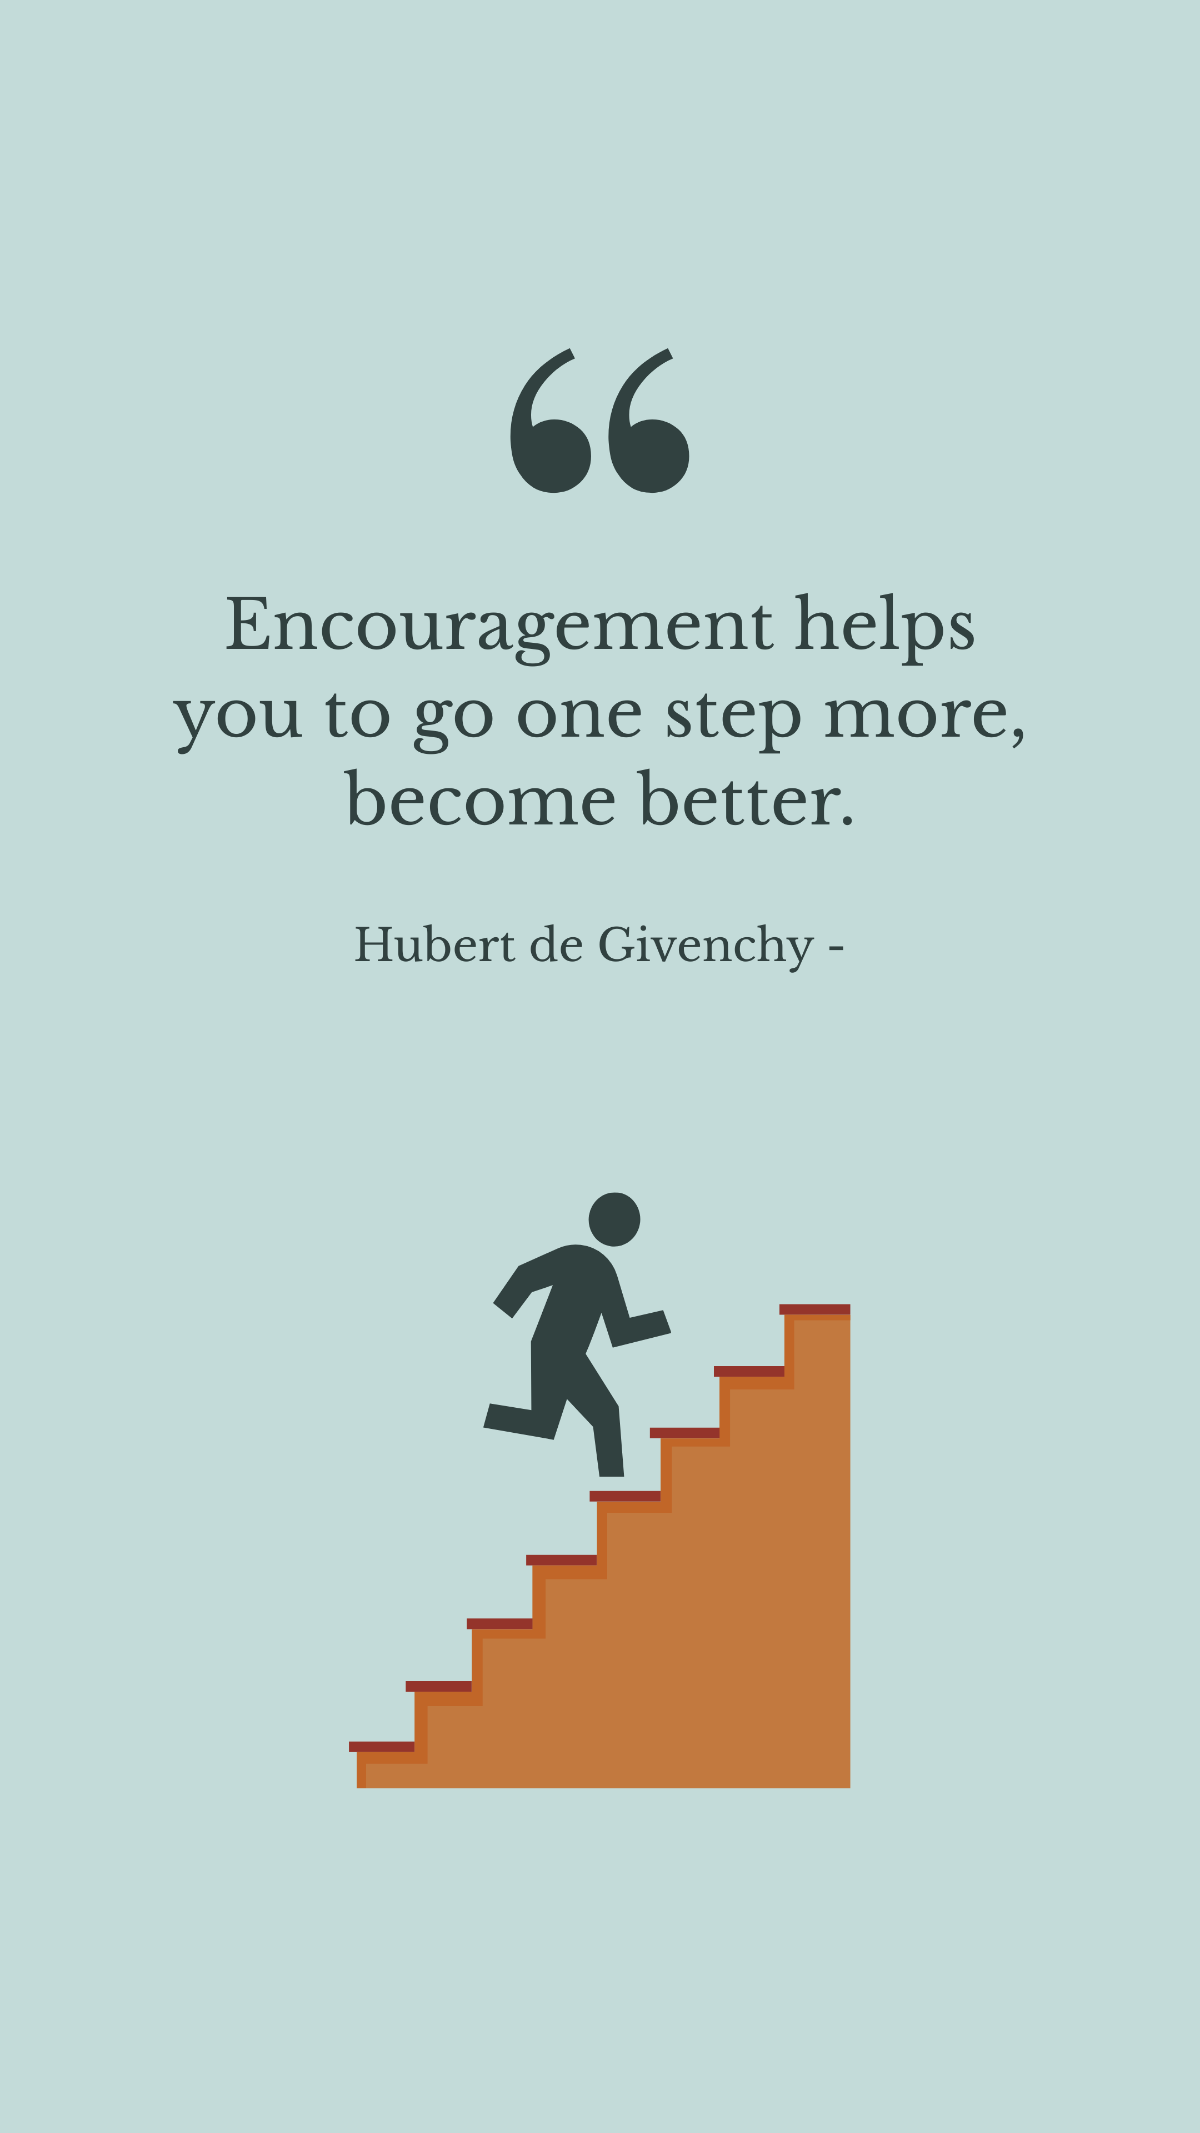 Hubert de Givenchy - Encouragement helps you to go one step more, become better.